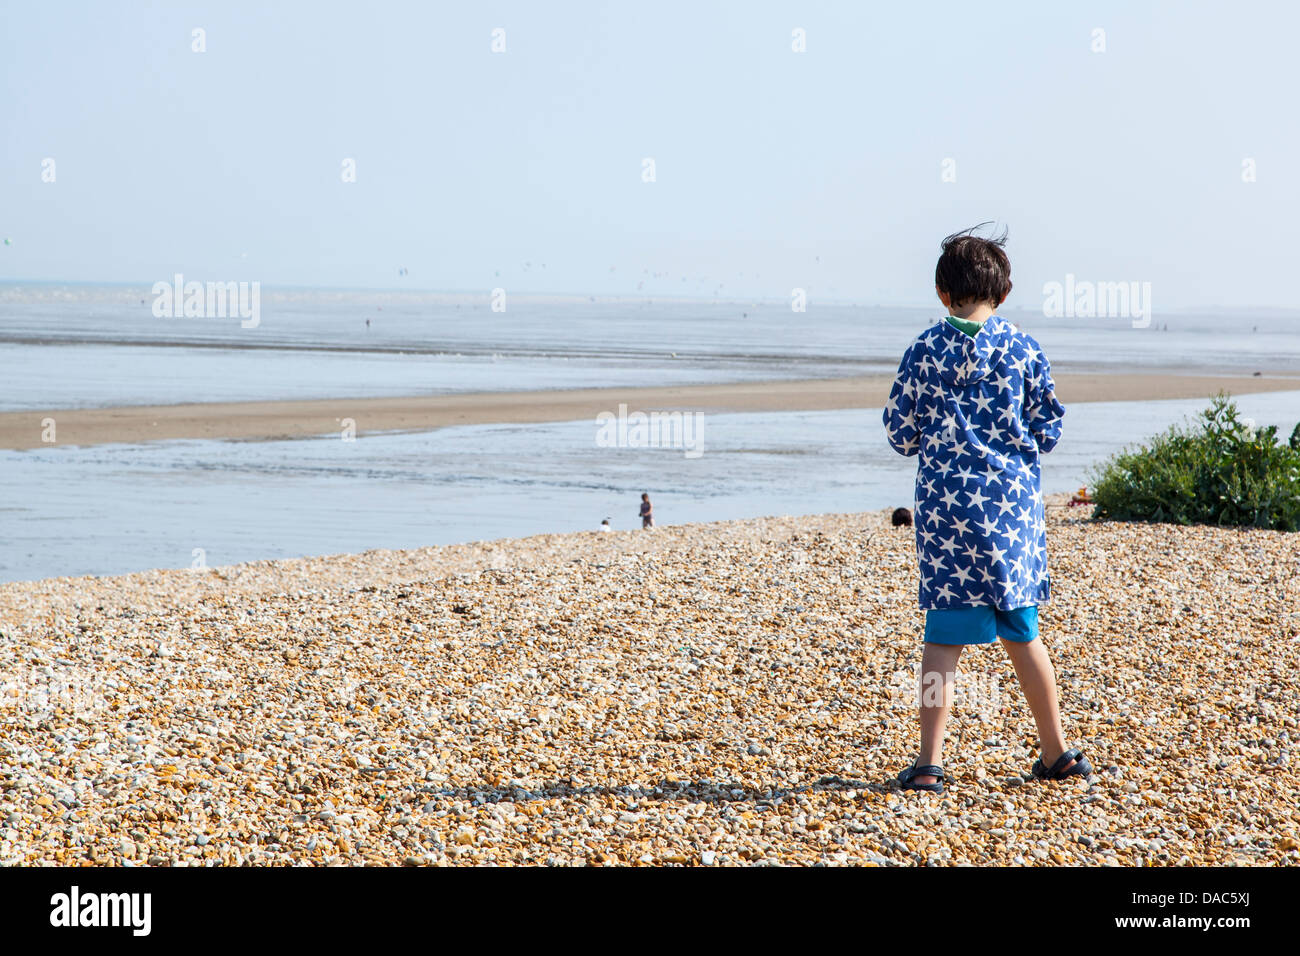 Boy standing on the beach, blue jacket with white pattern, seaside beach with boy standing, facing the beach Stock Photo